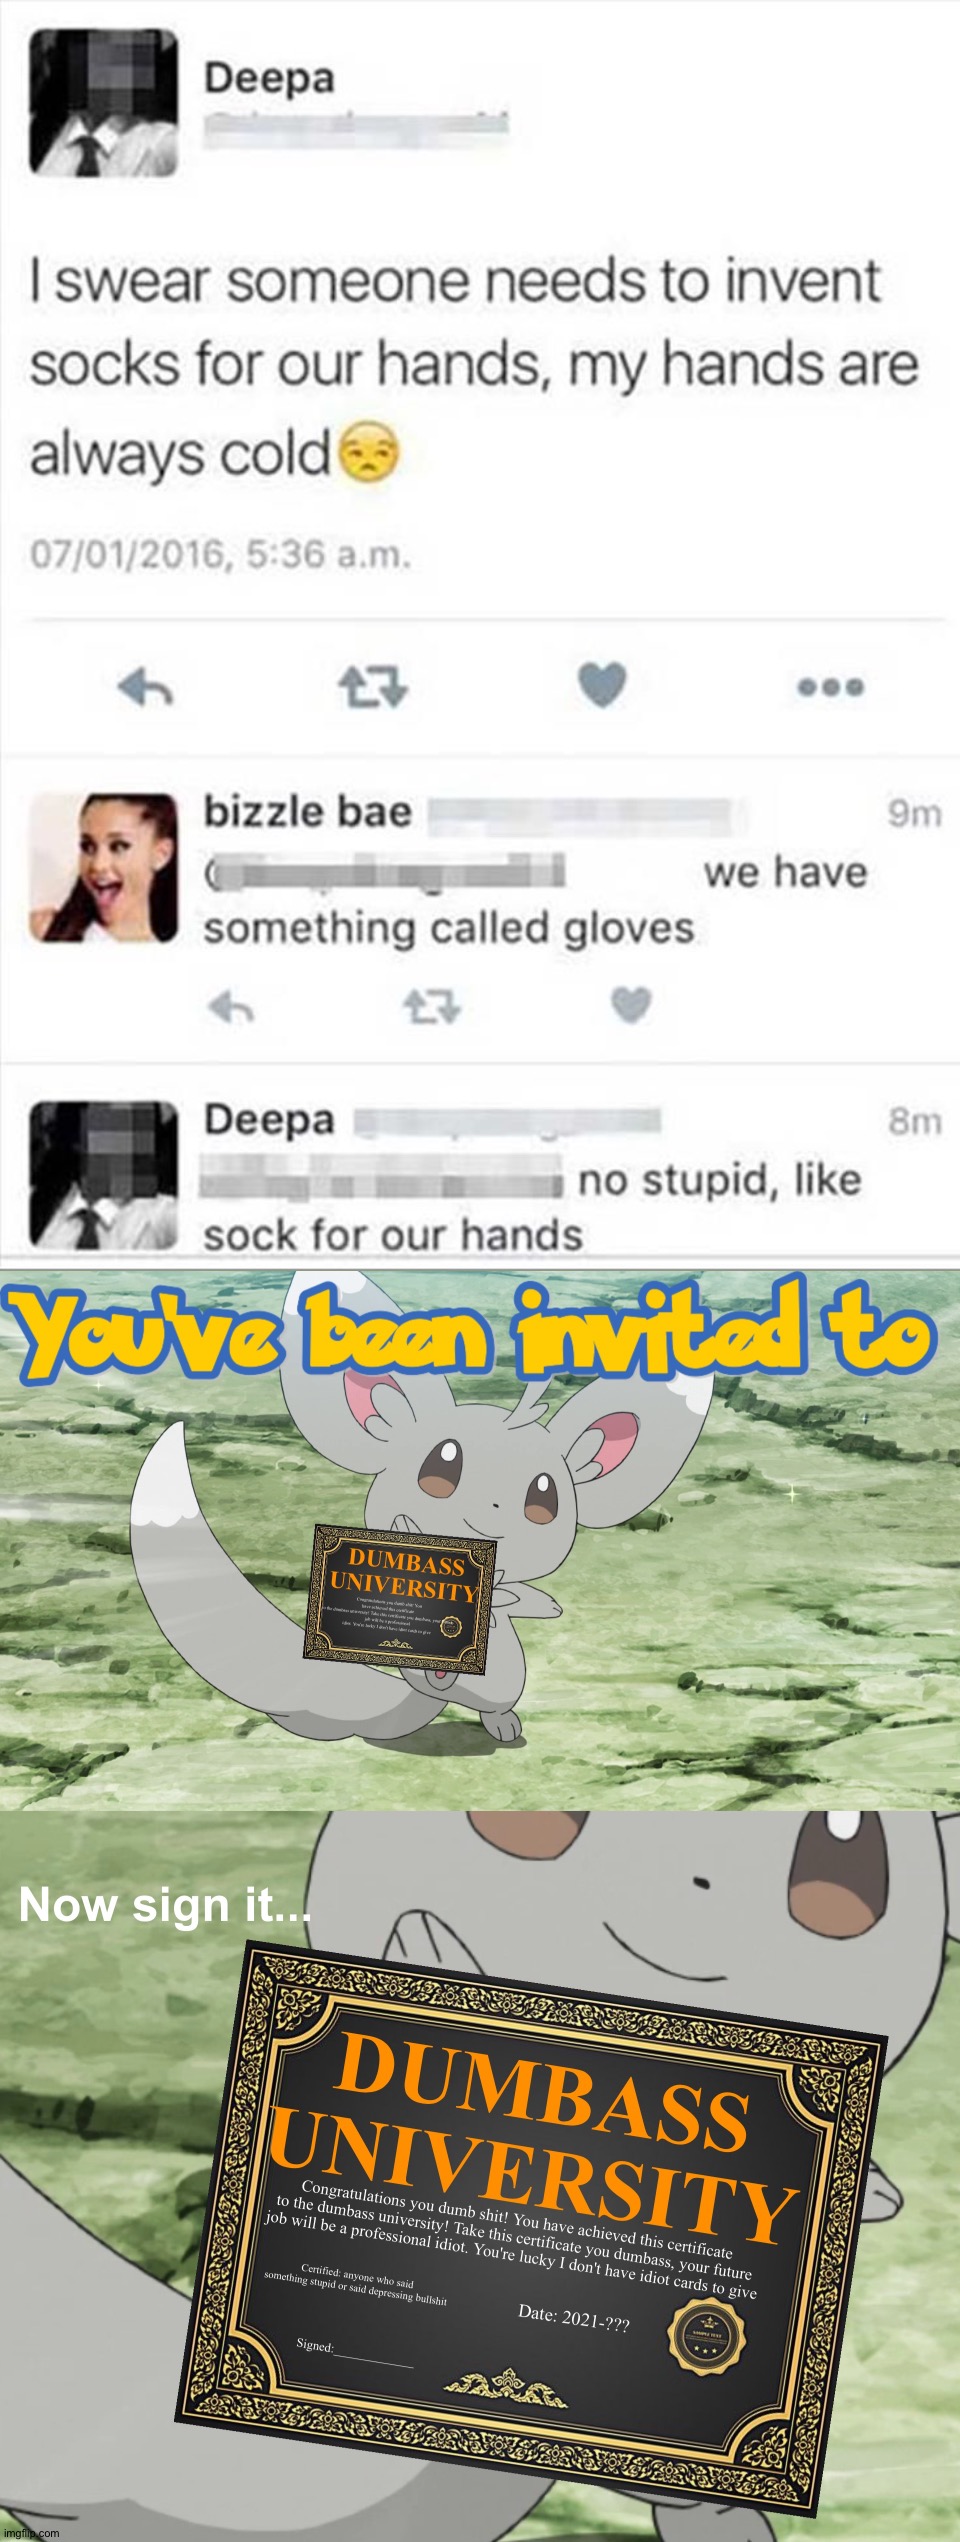 They're called "gloves" | image tagged in you've been invited to dumbass university,memes,funny,funny memes,stupid people,dank memes | made w/ Imgflip meme maker